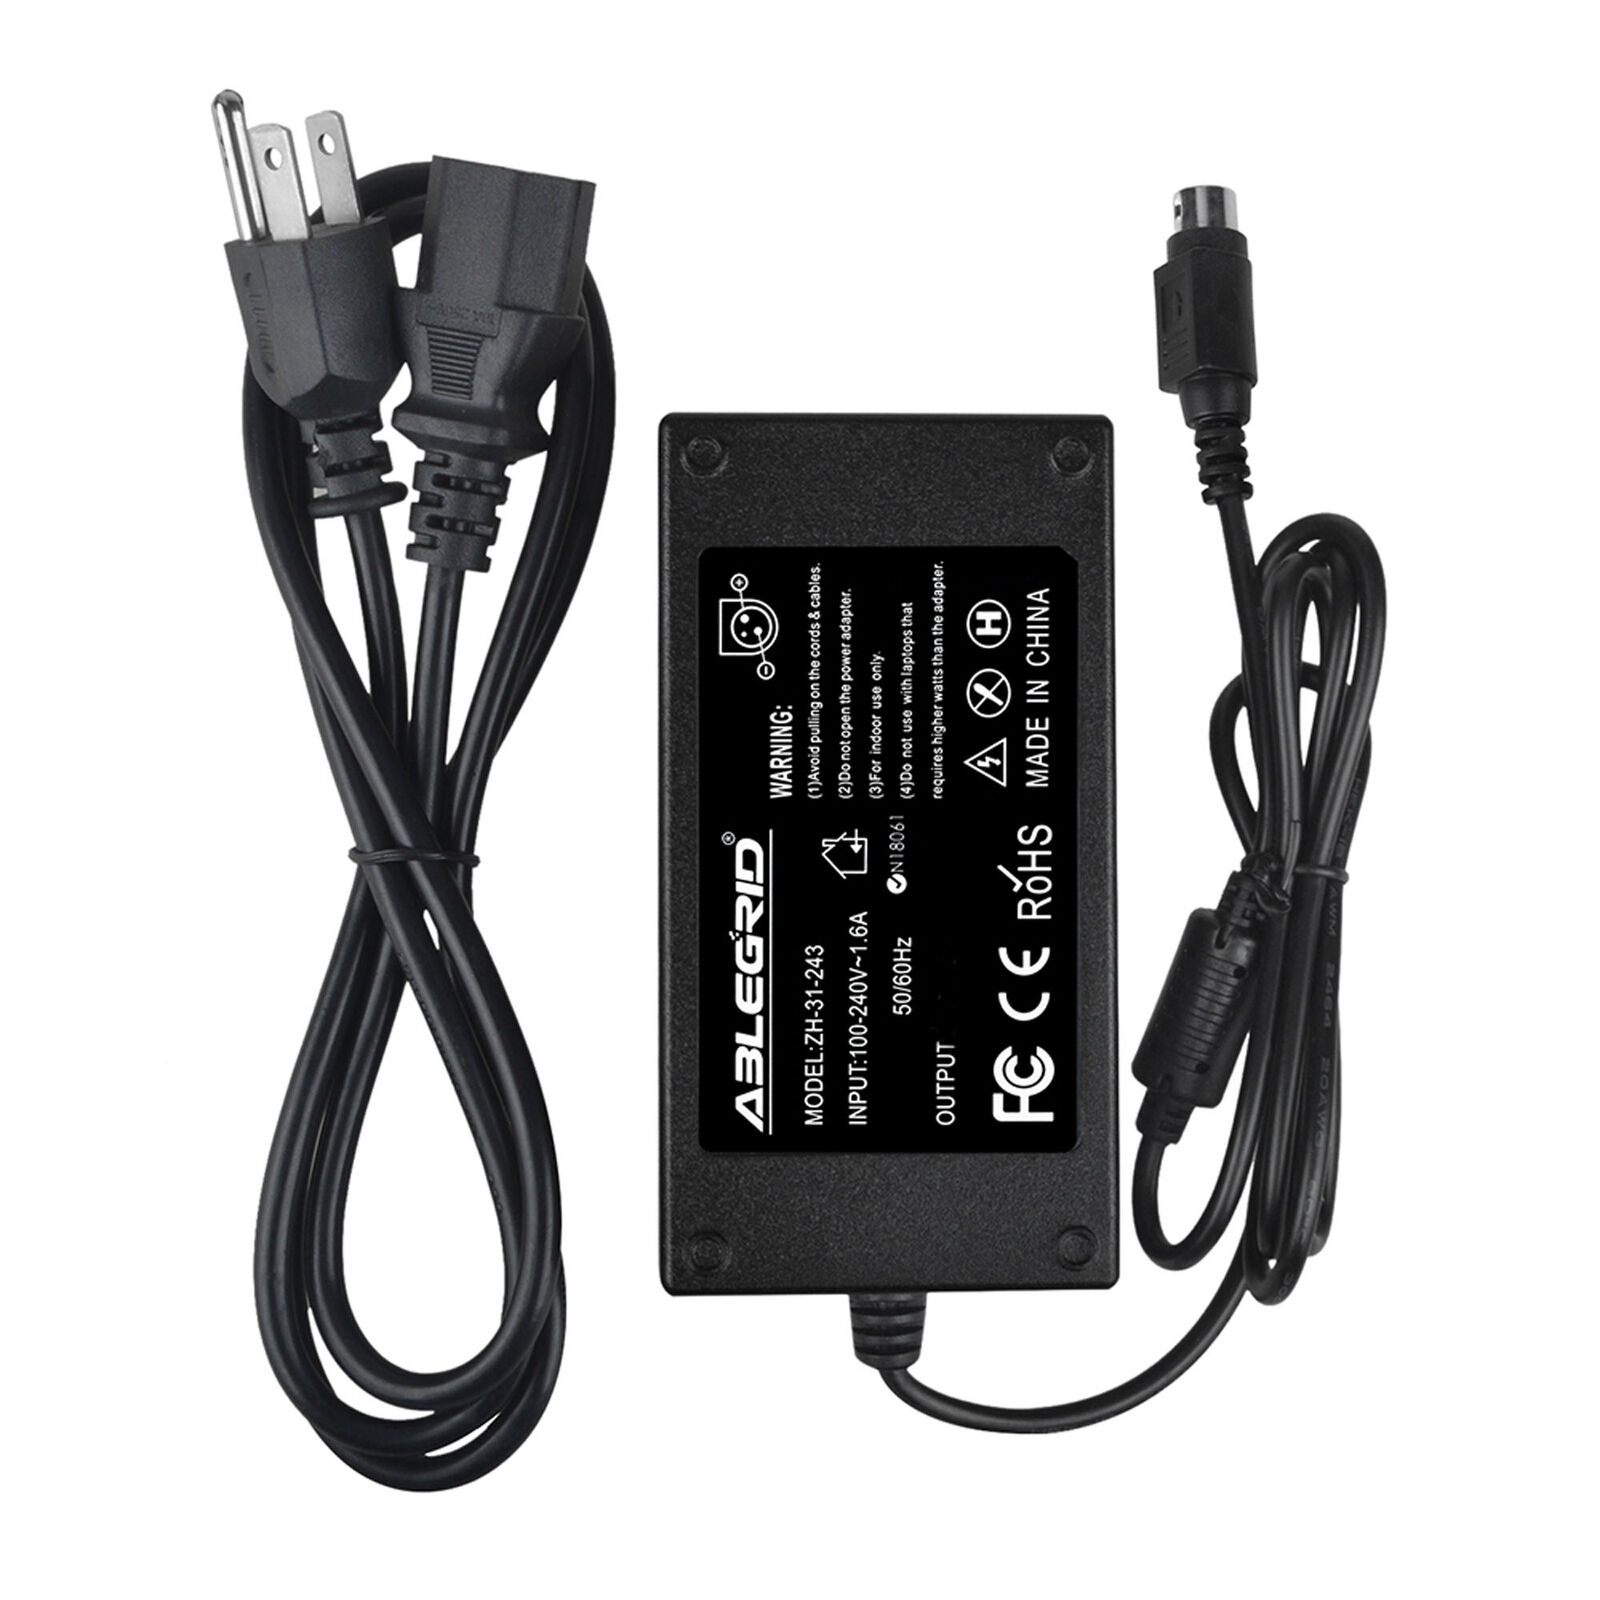 AC Adapter For Arkscan 2054A 2054A-USB Thermal Shipping Label Printer Power Cord